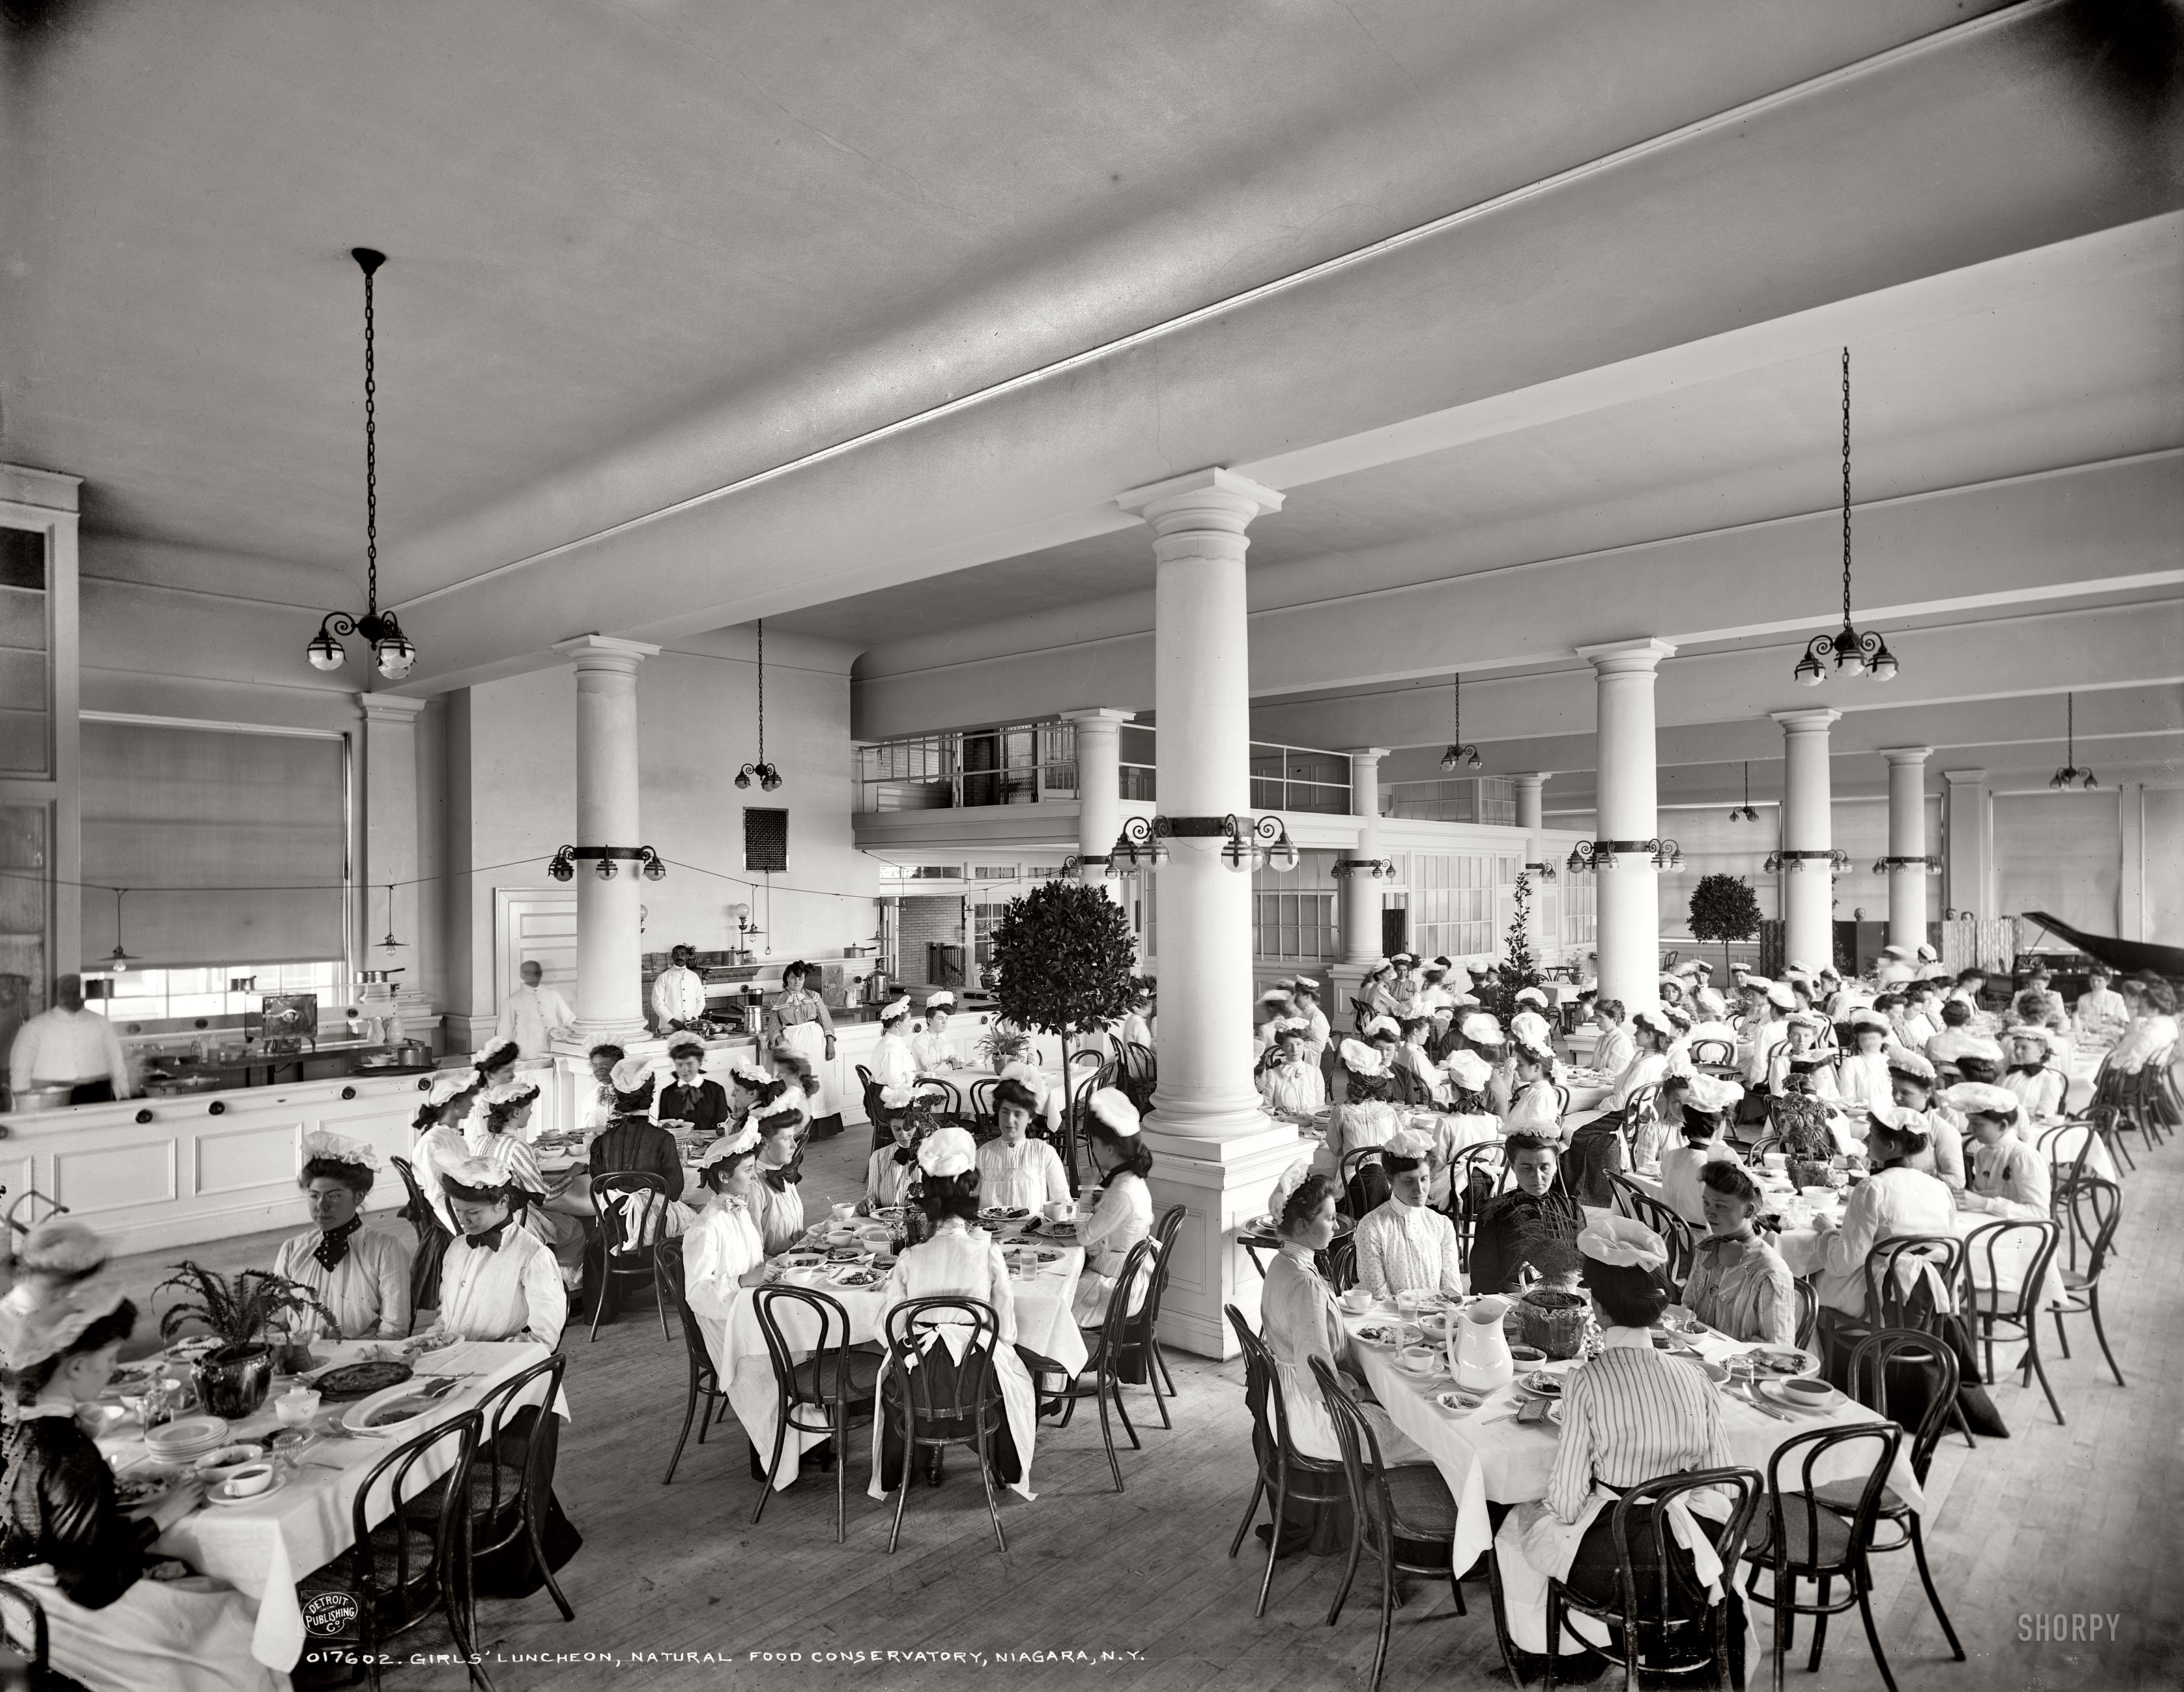 Niagara Falls, New York, circa 1906. "Girls' Luncheon, Natural Food Conservatory." Employee dining room at the Shredded Wheat factory. 8x10 inch dry plate glass negative, Detroit Publishing Company. View full size.